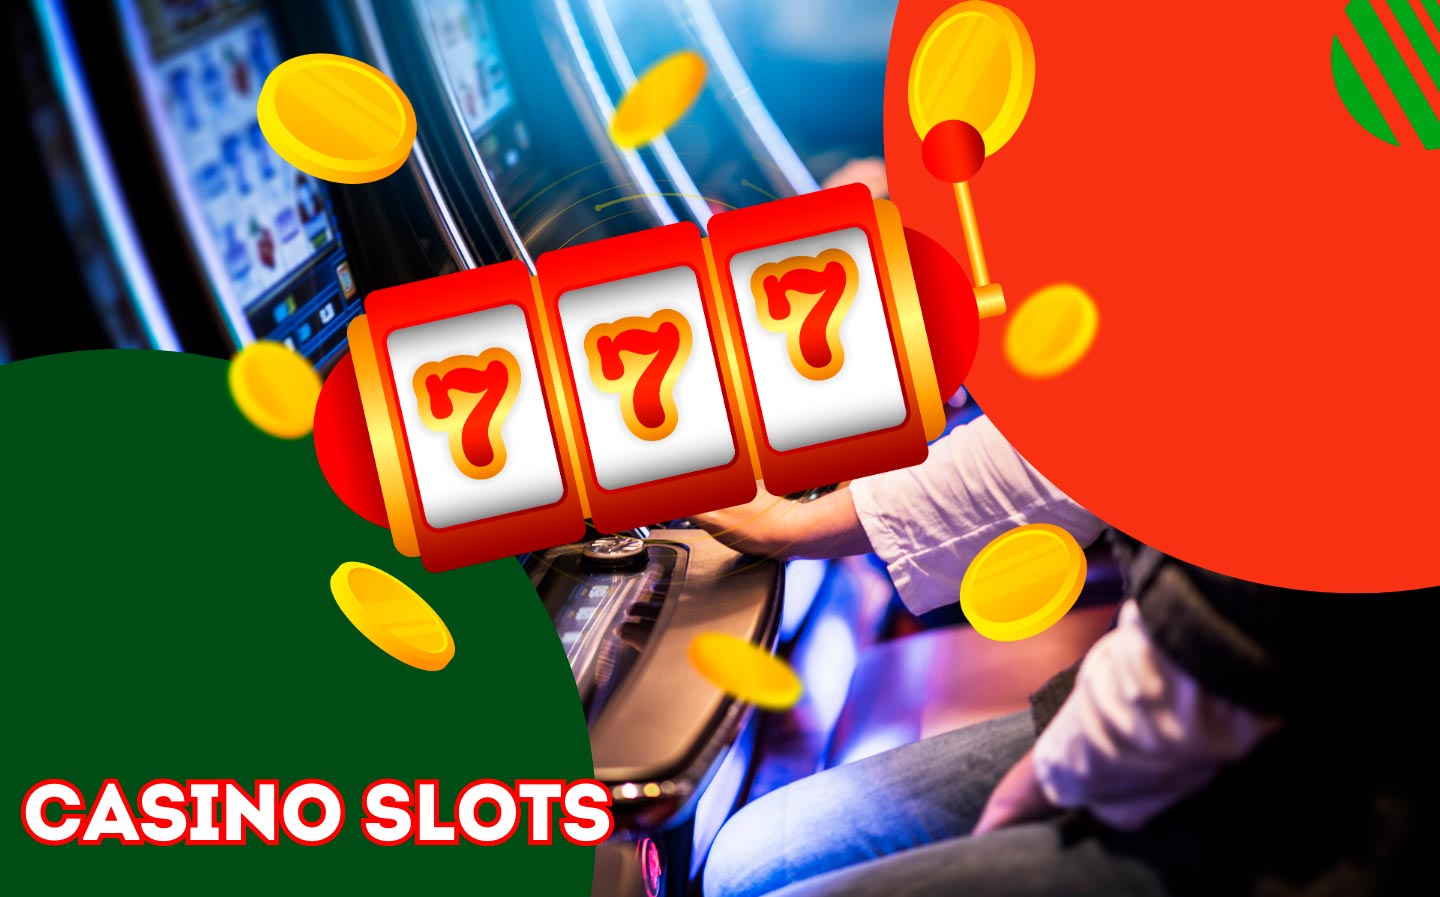 The main type of entertainment in online casinos is virtual slot machines